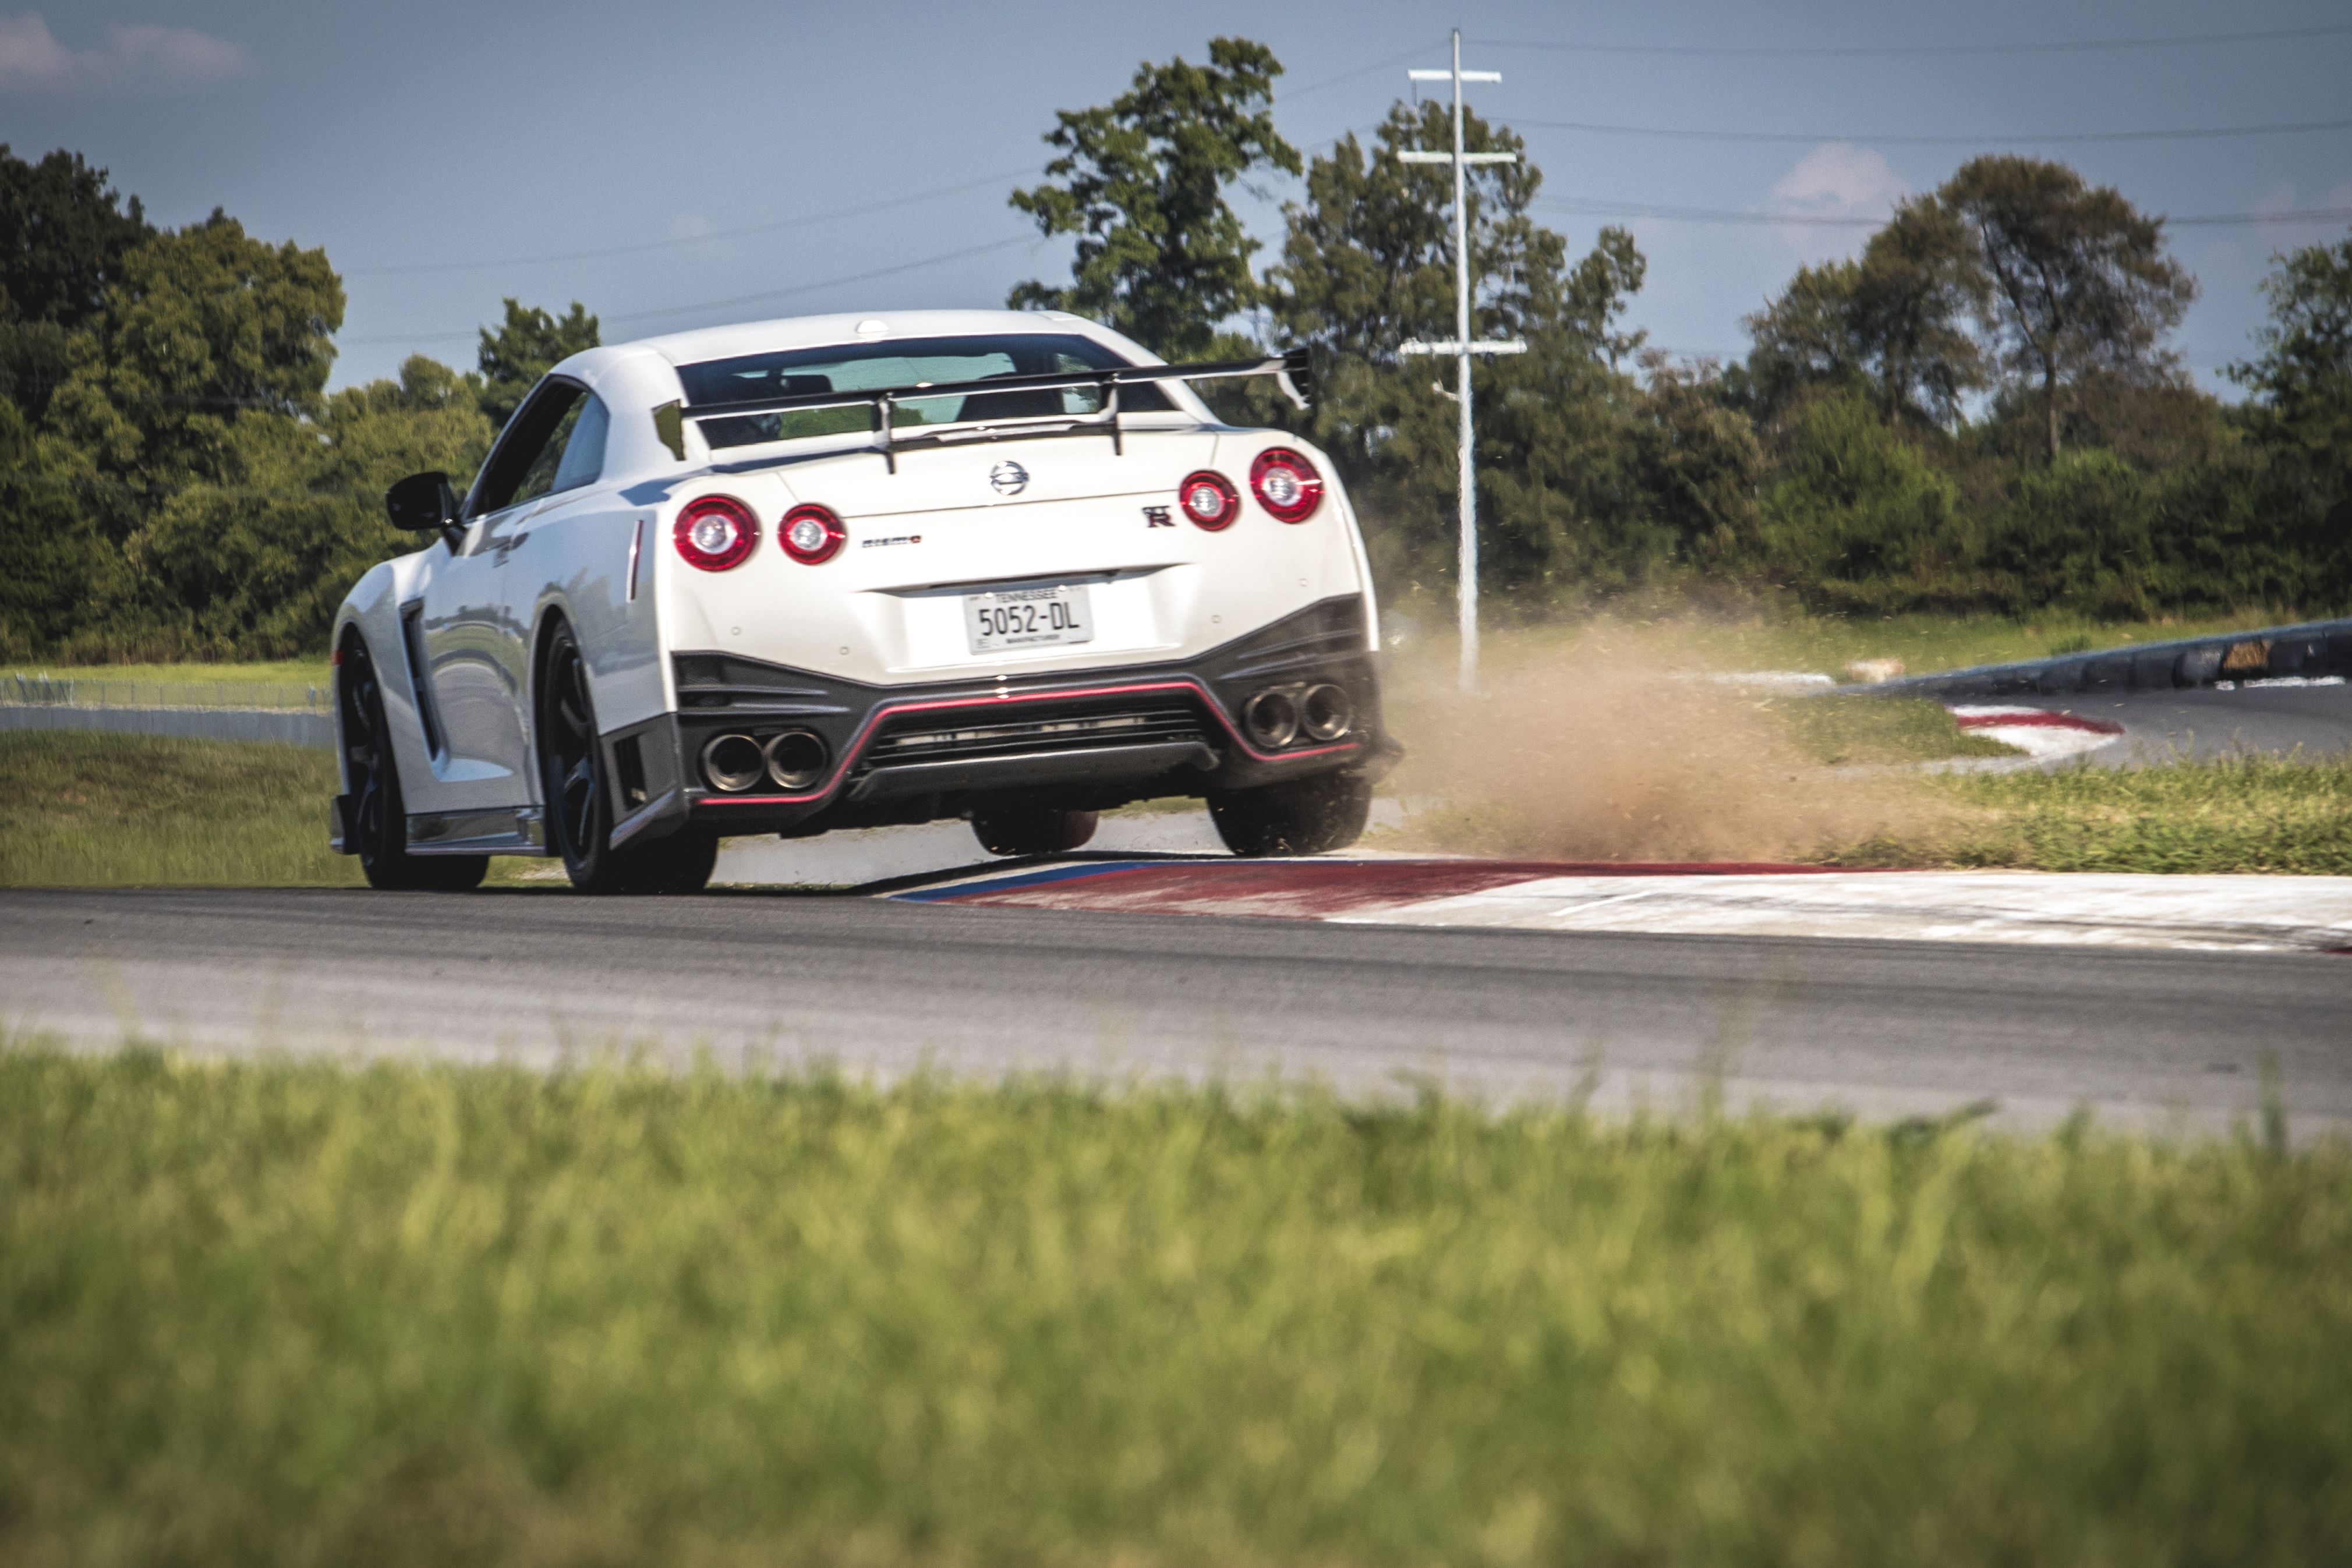 The 17 Nissan Gt R Nismo Is Suddenly An Analog Sports Car